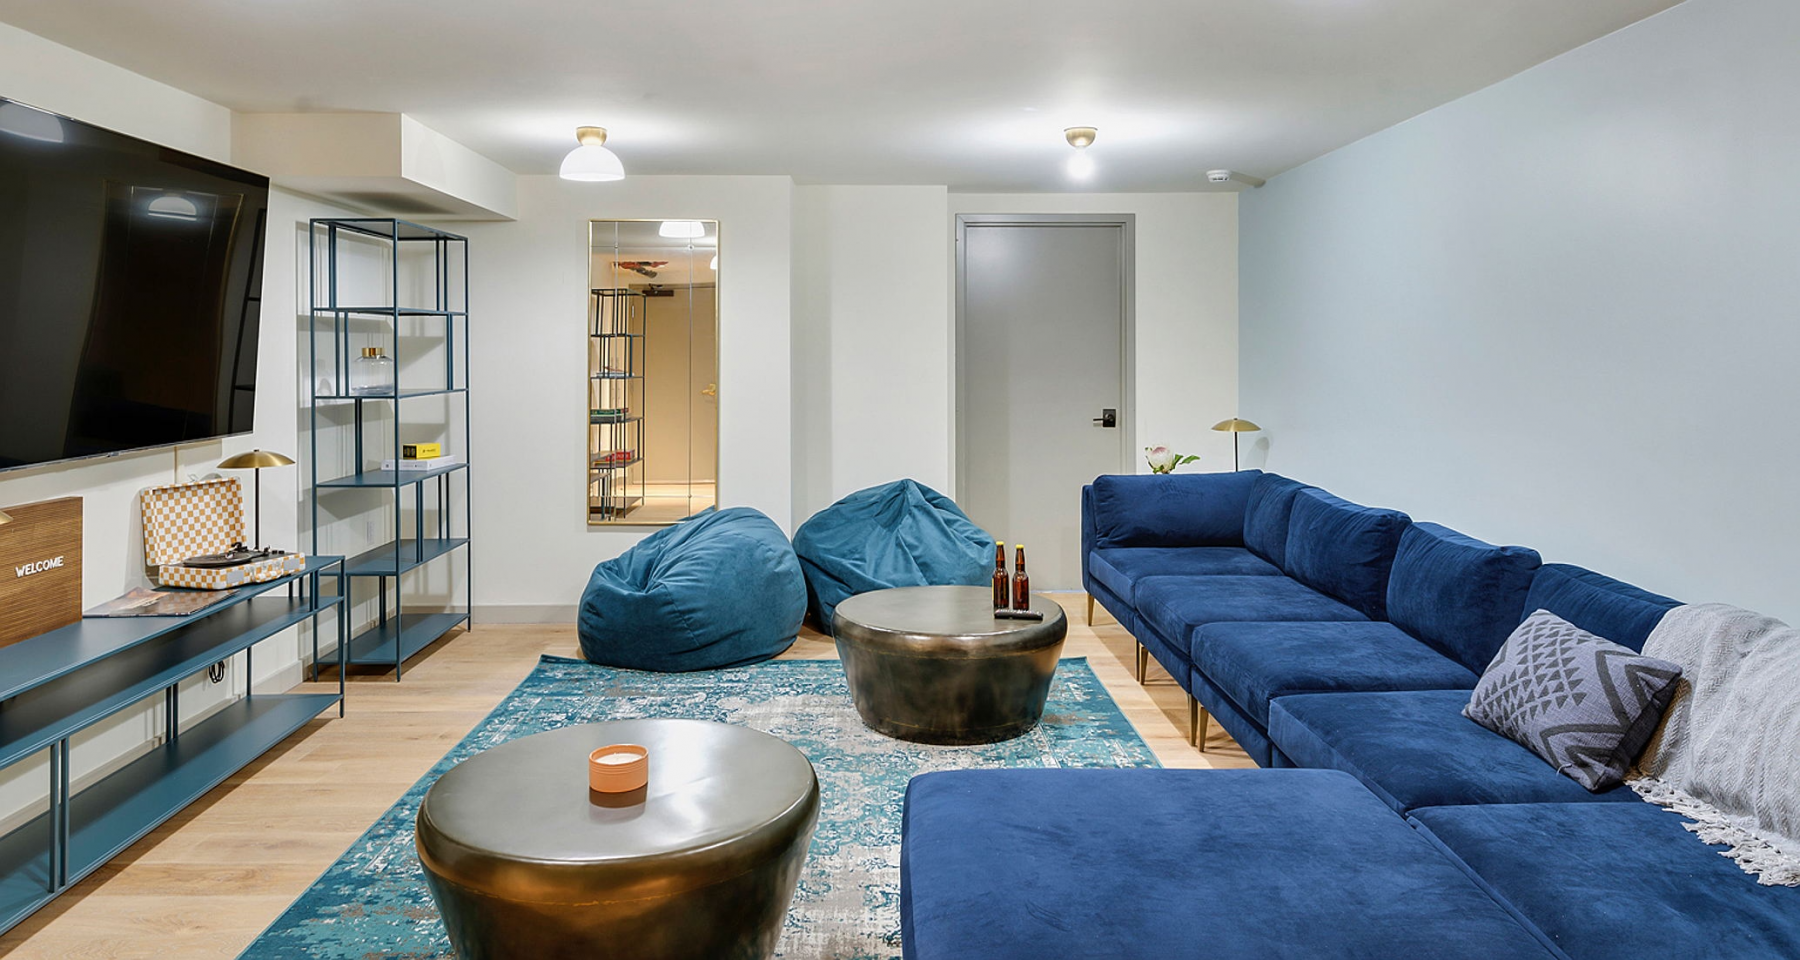 Common living room with blue couch, beanbags, and other decor